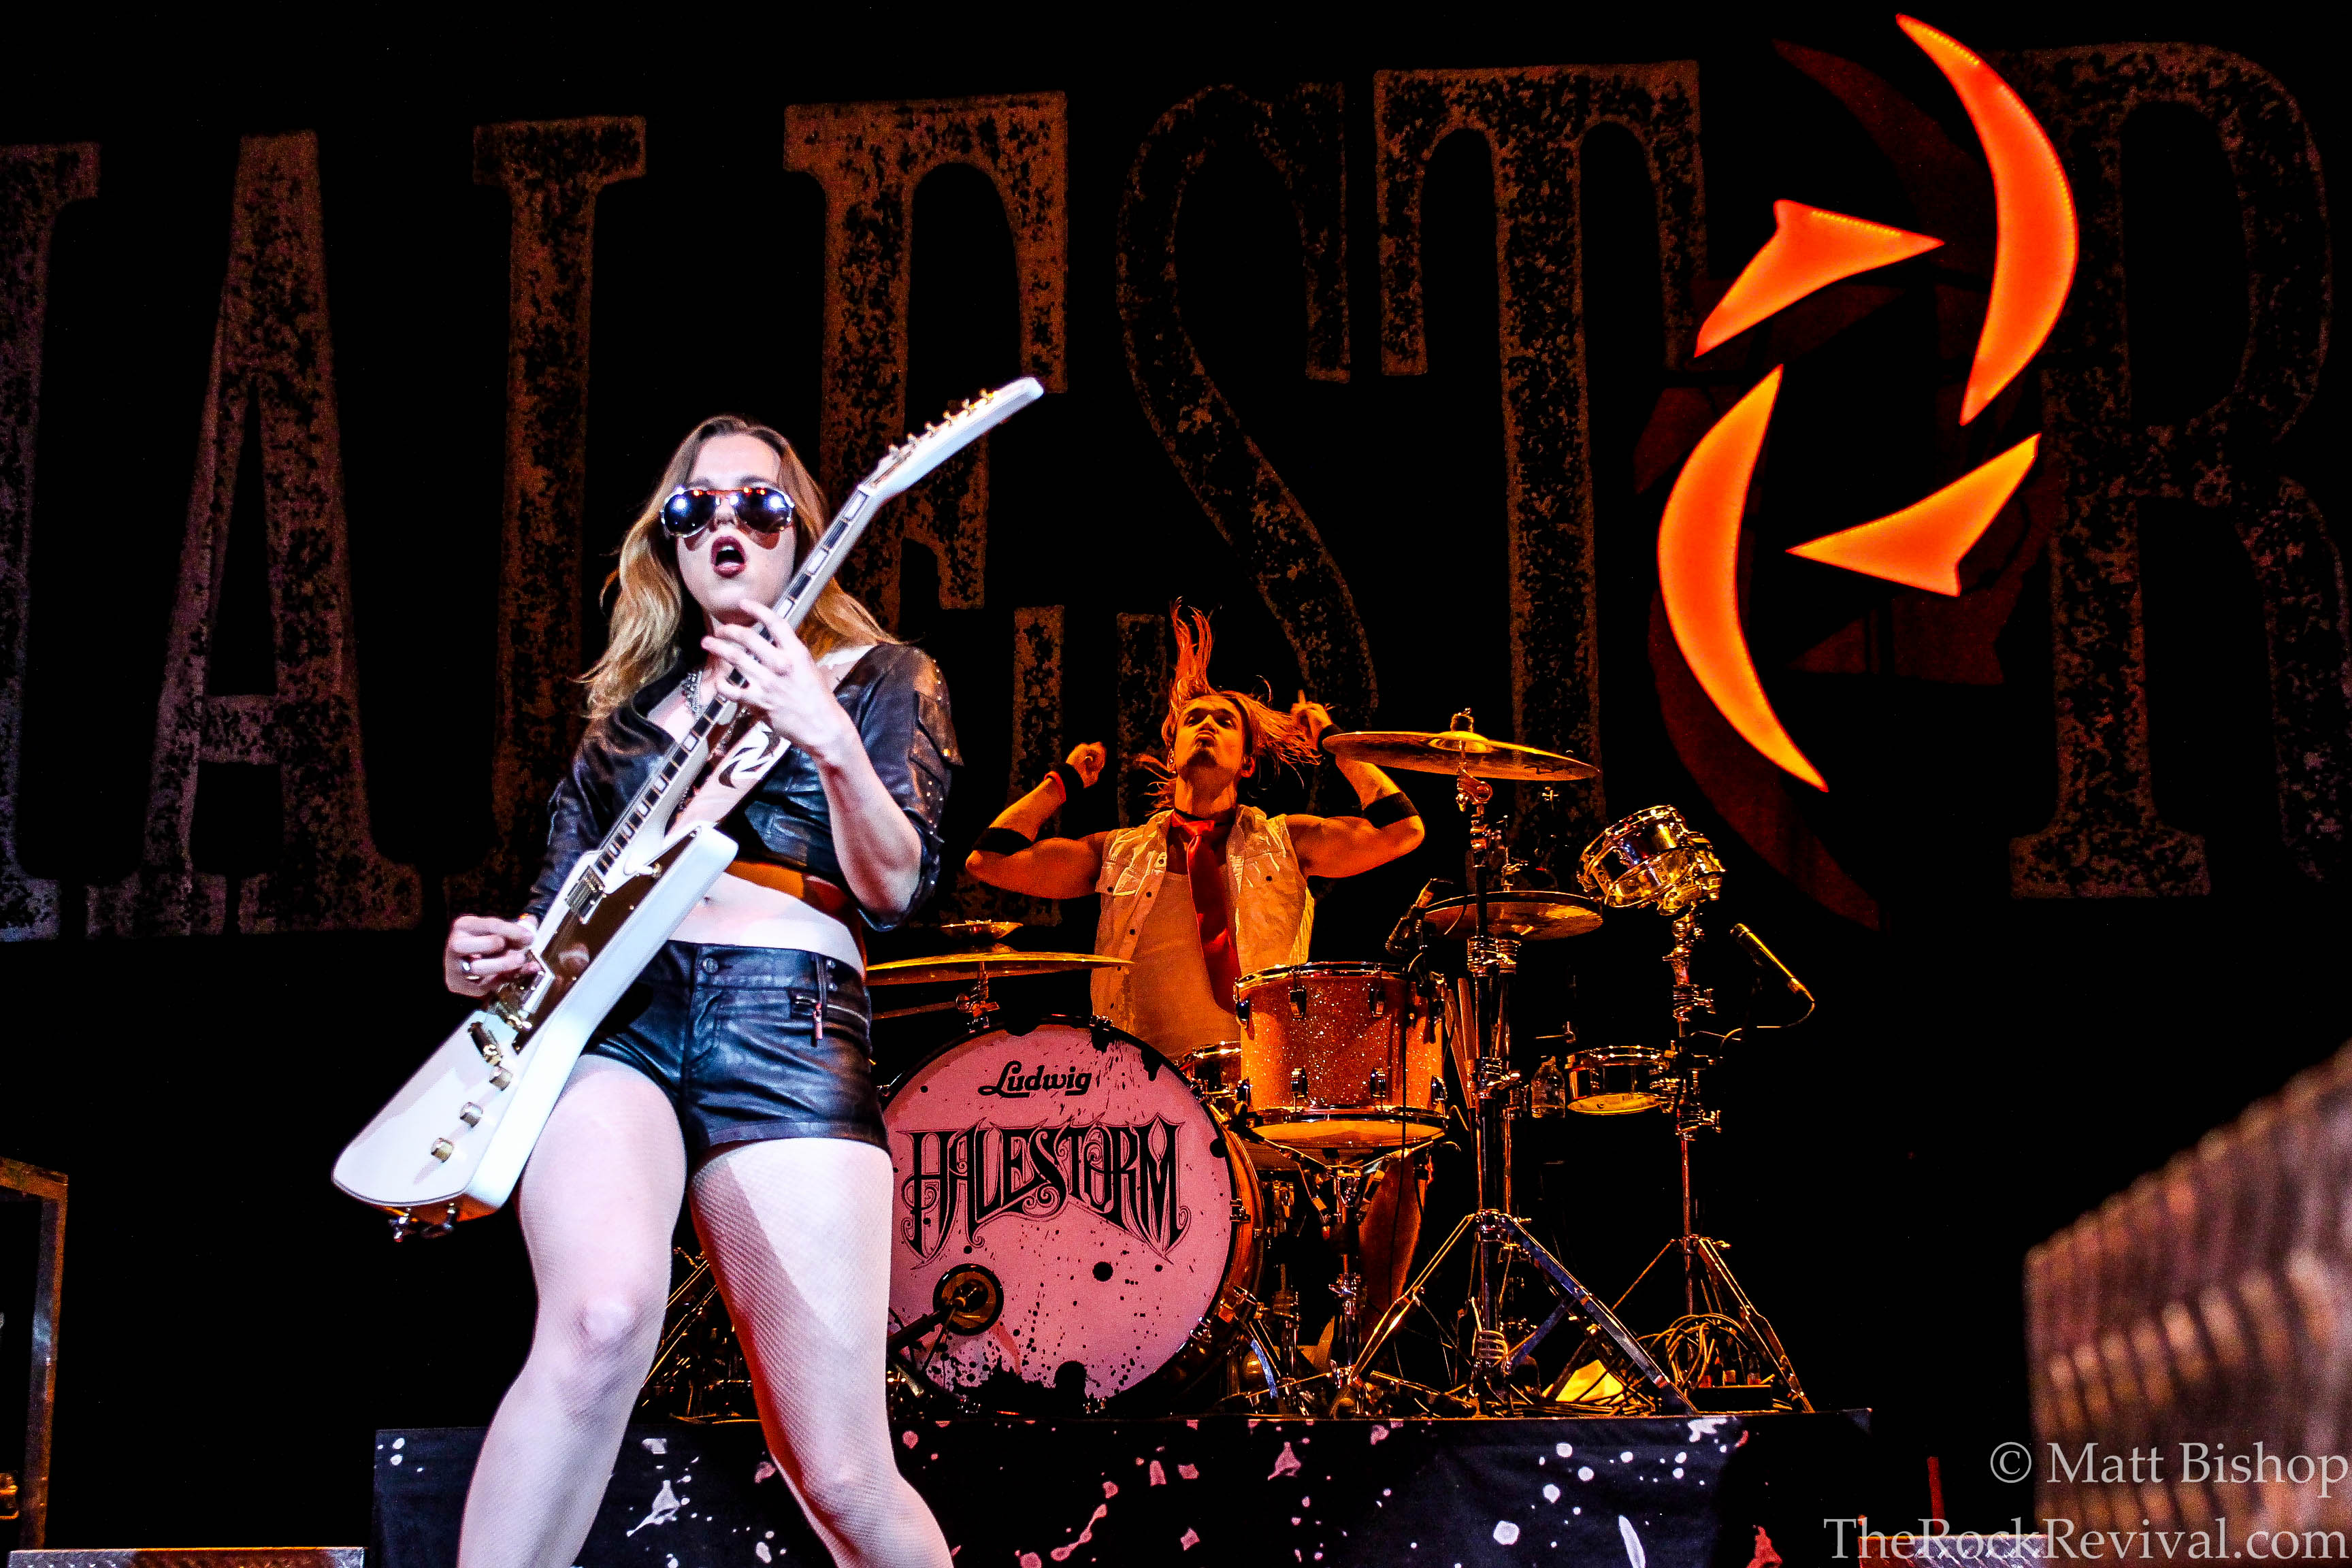 HALESTORM, LITA FORD, and DOROTHY ANNOUNCE 2016 ARENA TOUR